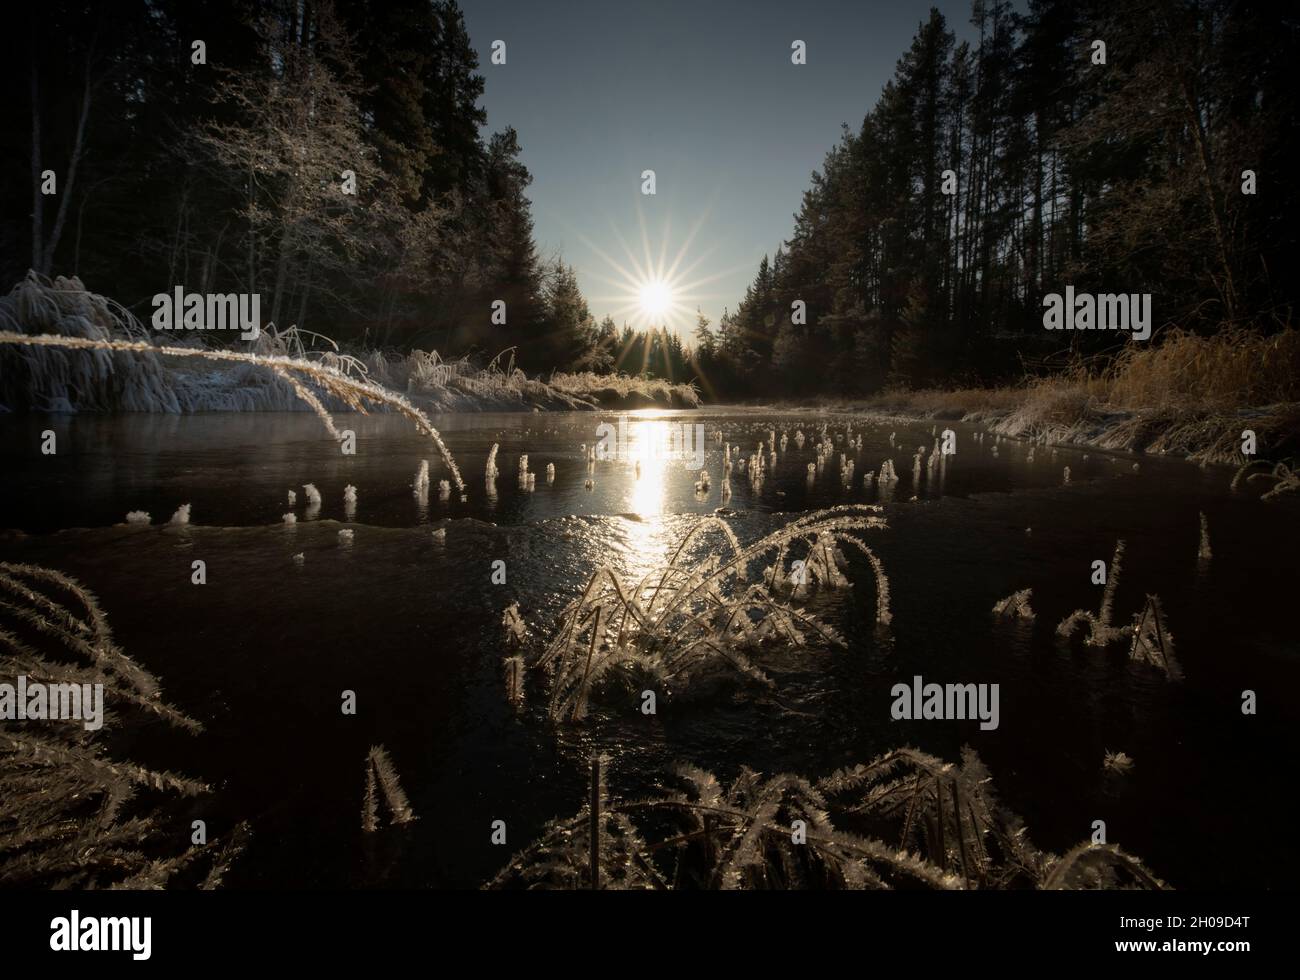 river and ice with sun beams in a winter landscape Stock Photo